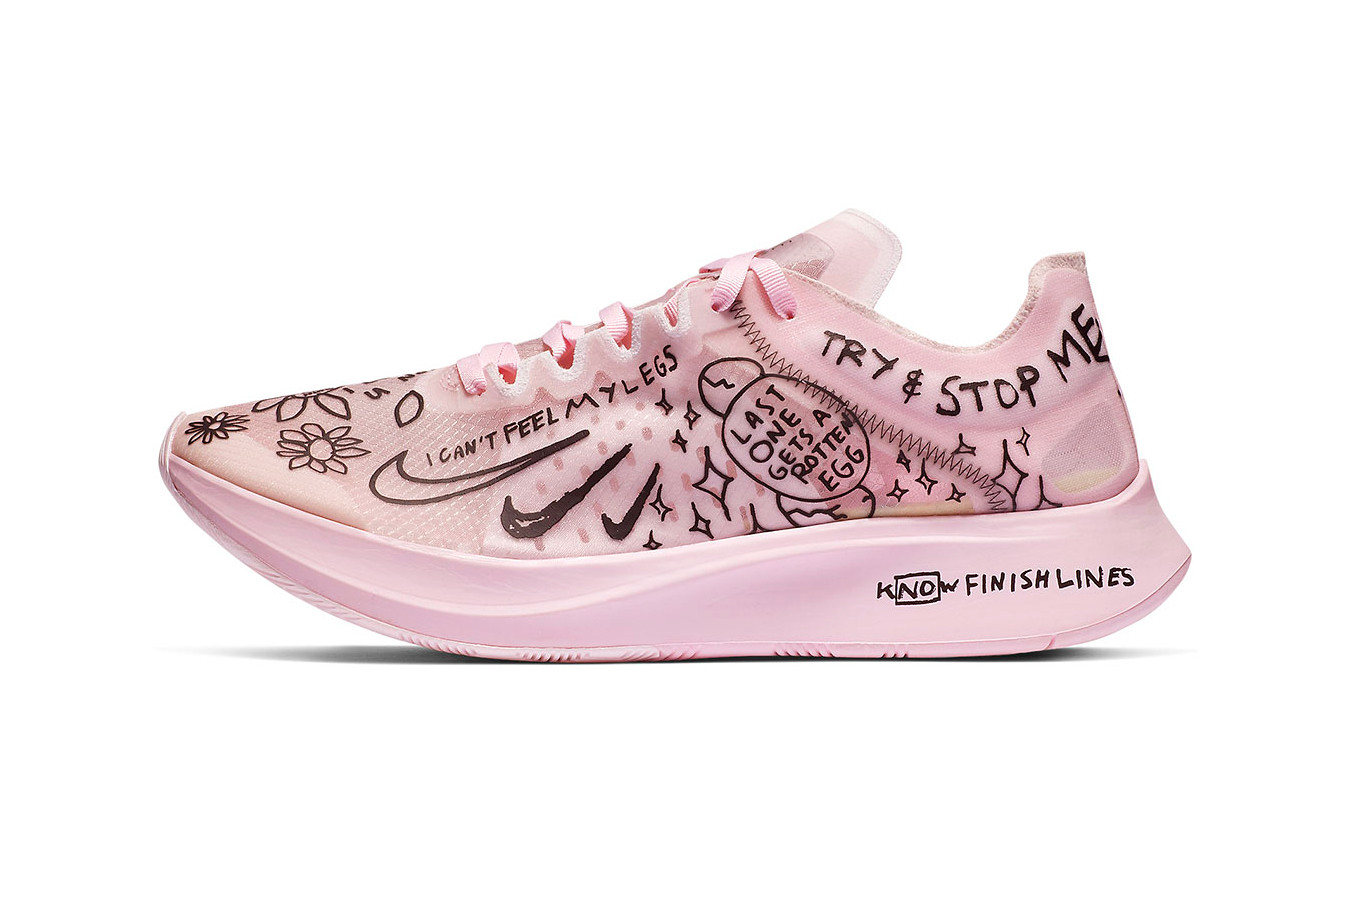 The Nike Zoom Fly SP Gets Doodled All 